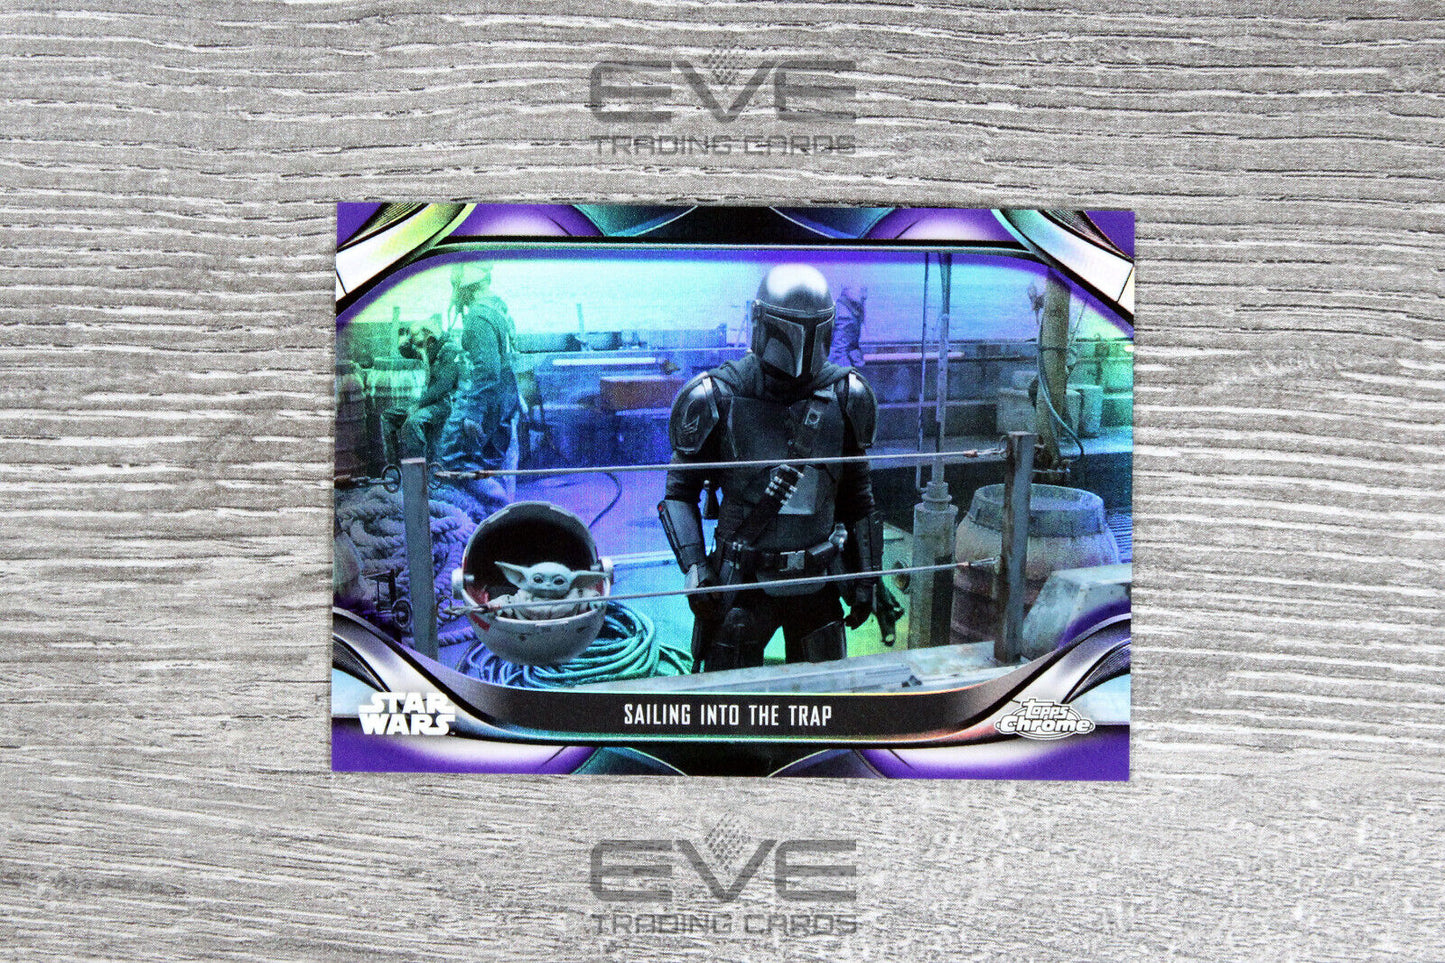 Topps Chrome Star Wars The Mandalorian Card S2-14 Sailing Into The Trap /75